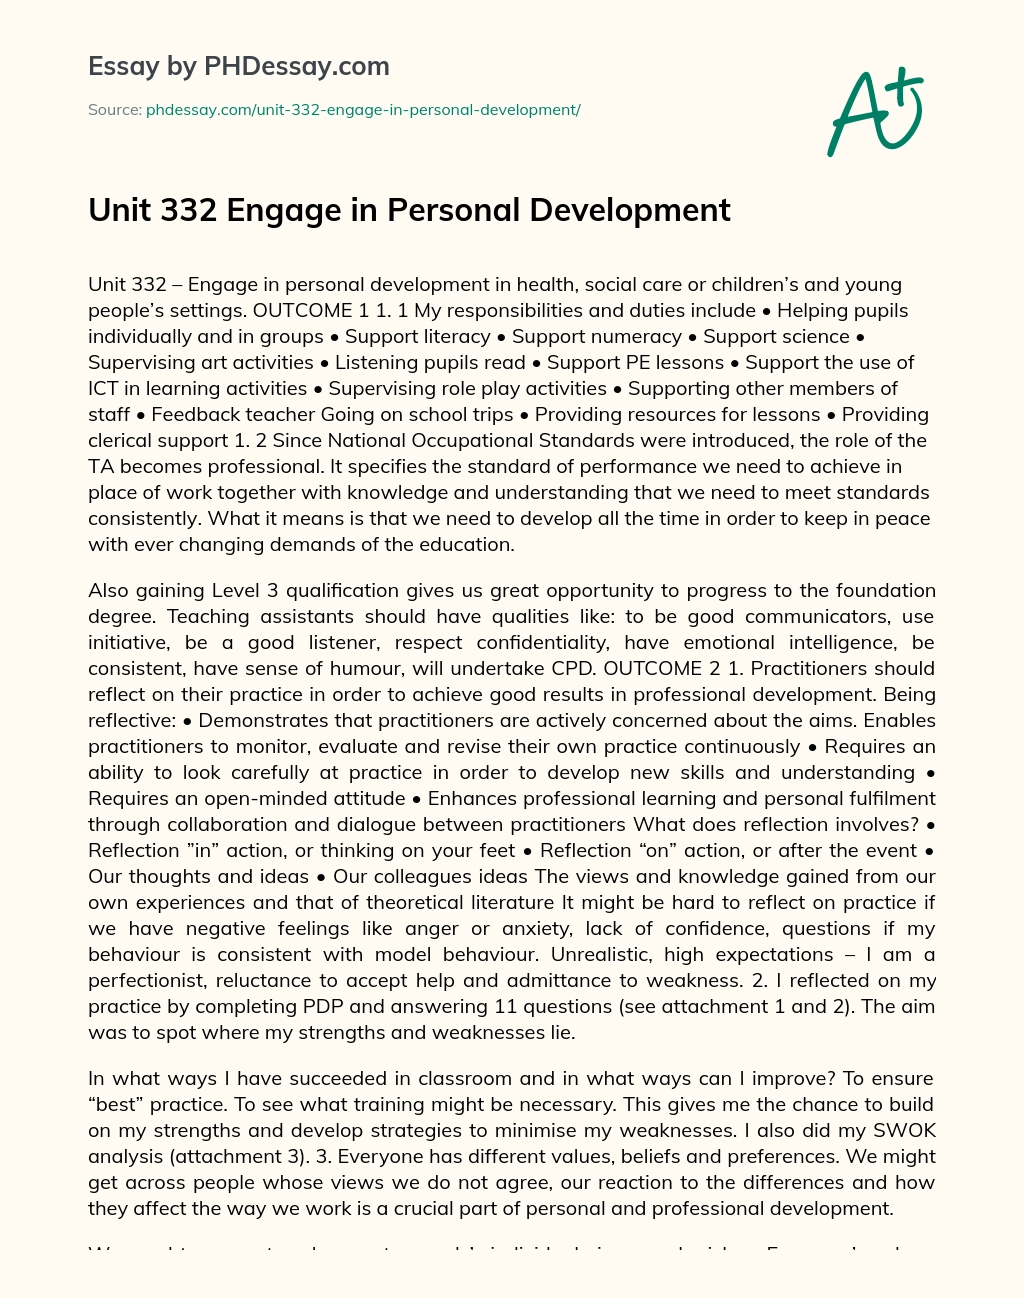 Unit 332 Engage in Personal Development essay